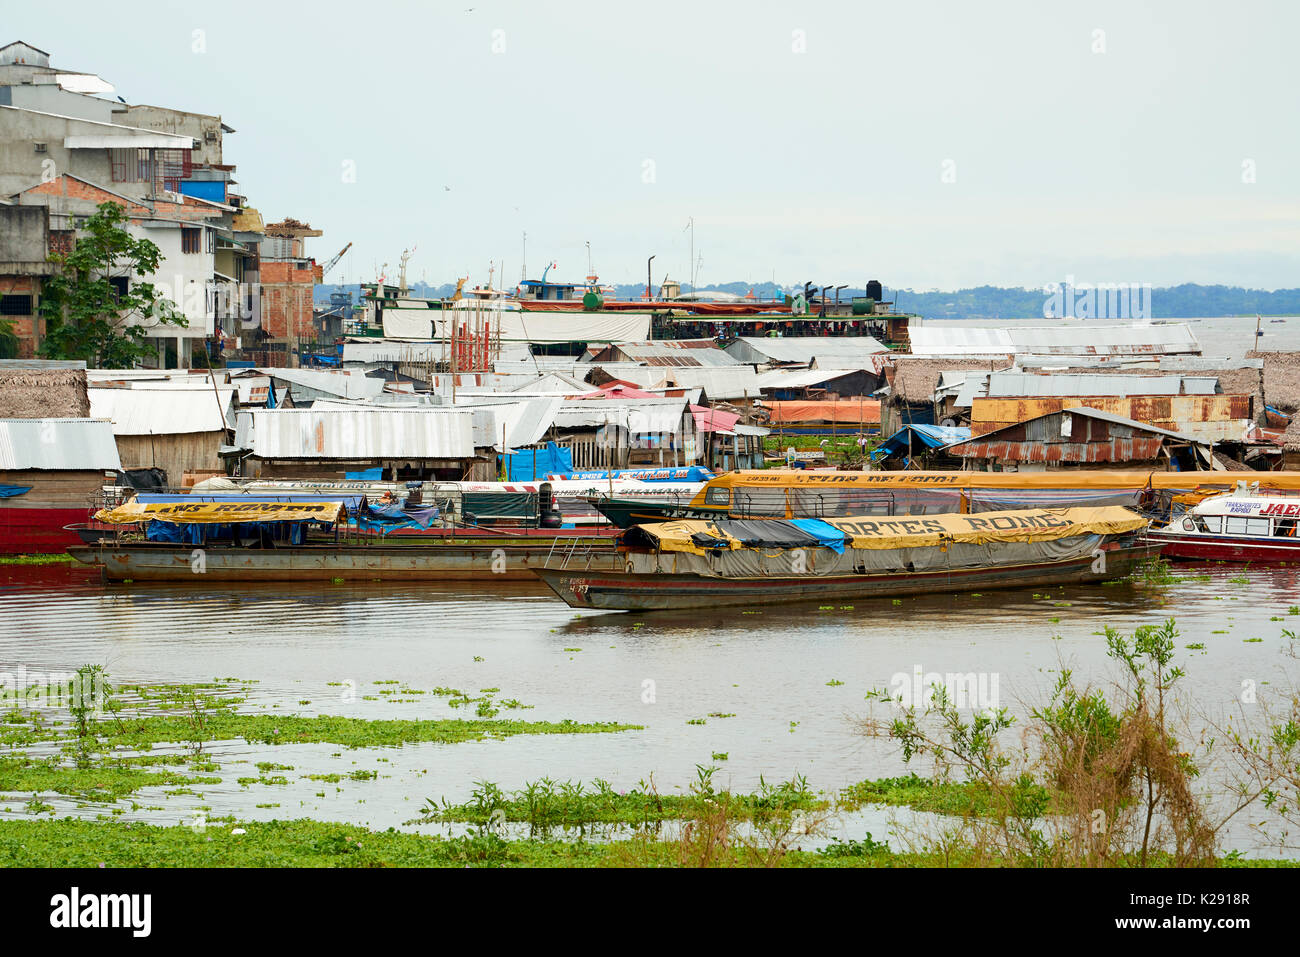 One of the smaller dock areas in Iquitos, Peru, with riverboats docked. Stock Photo